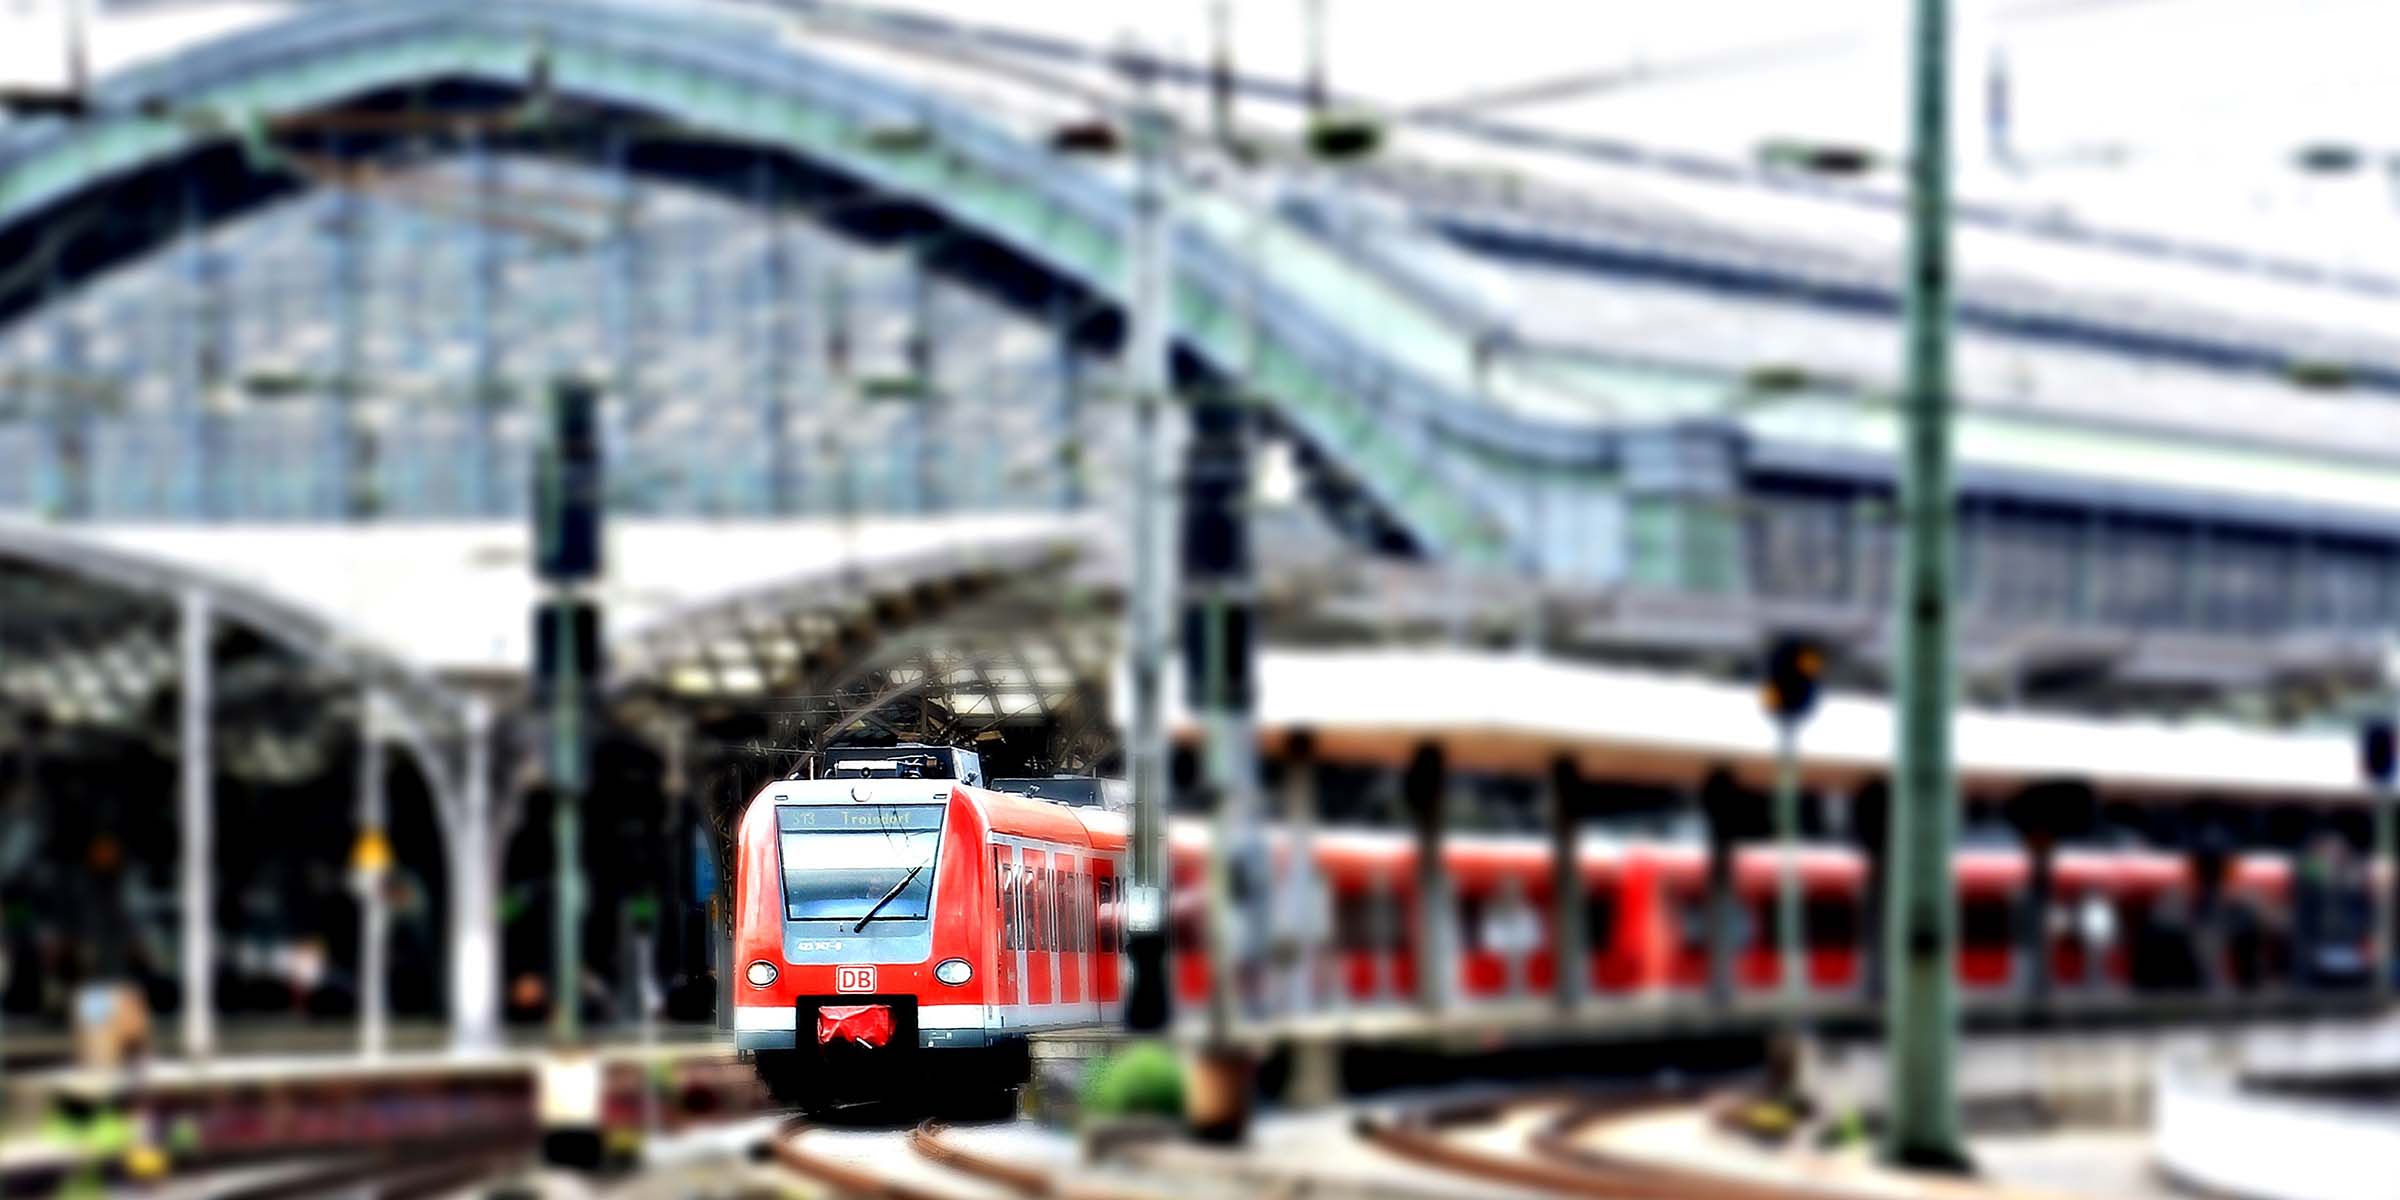 A red and grey train is departing from the train station in Cologne.